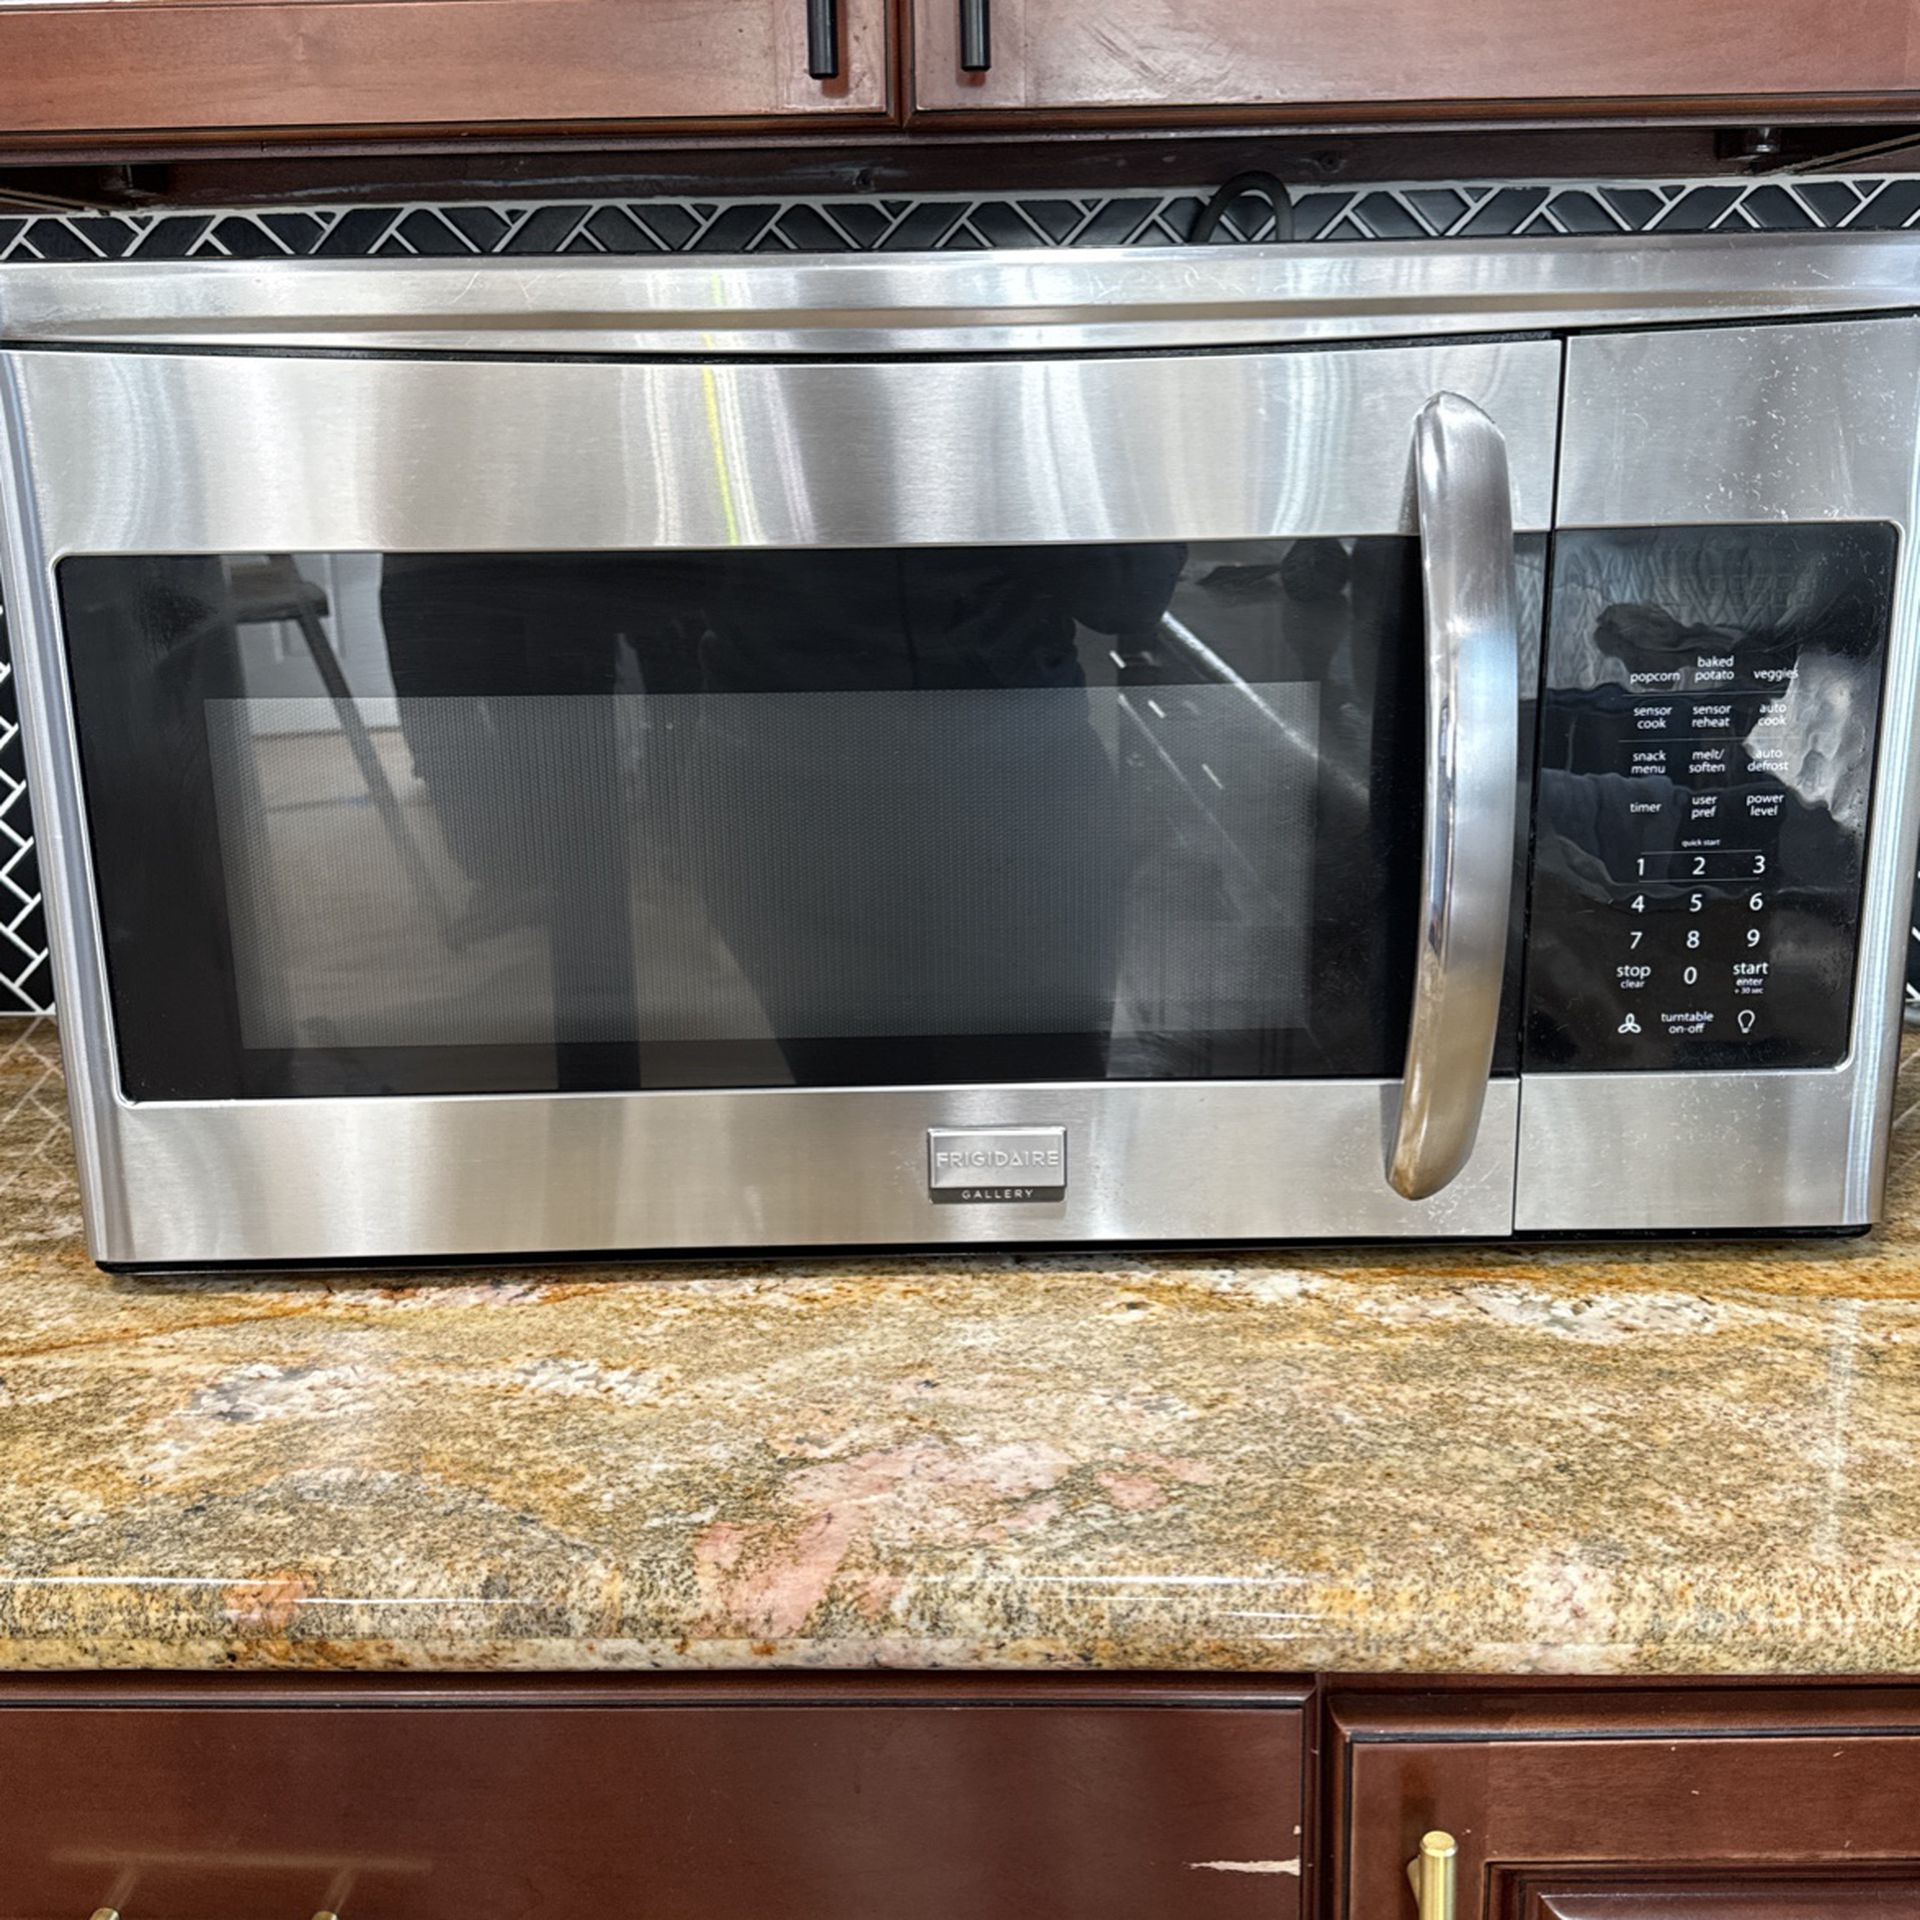 Microwave for purchase